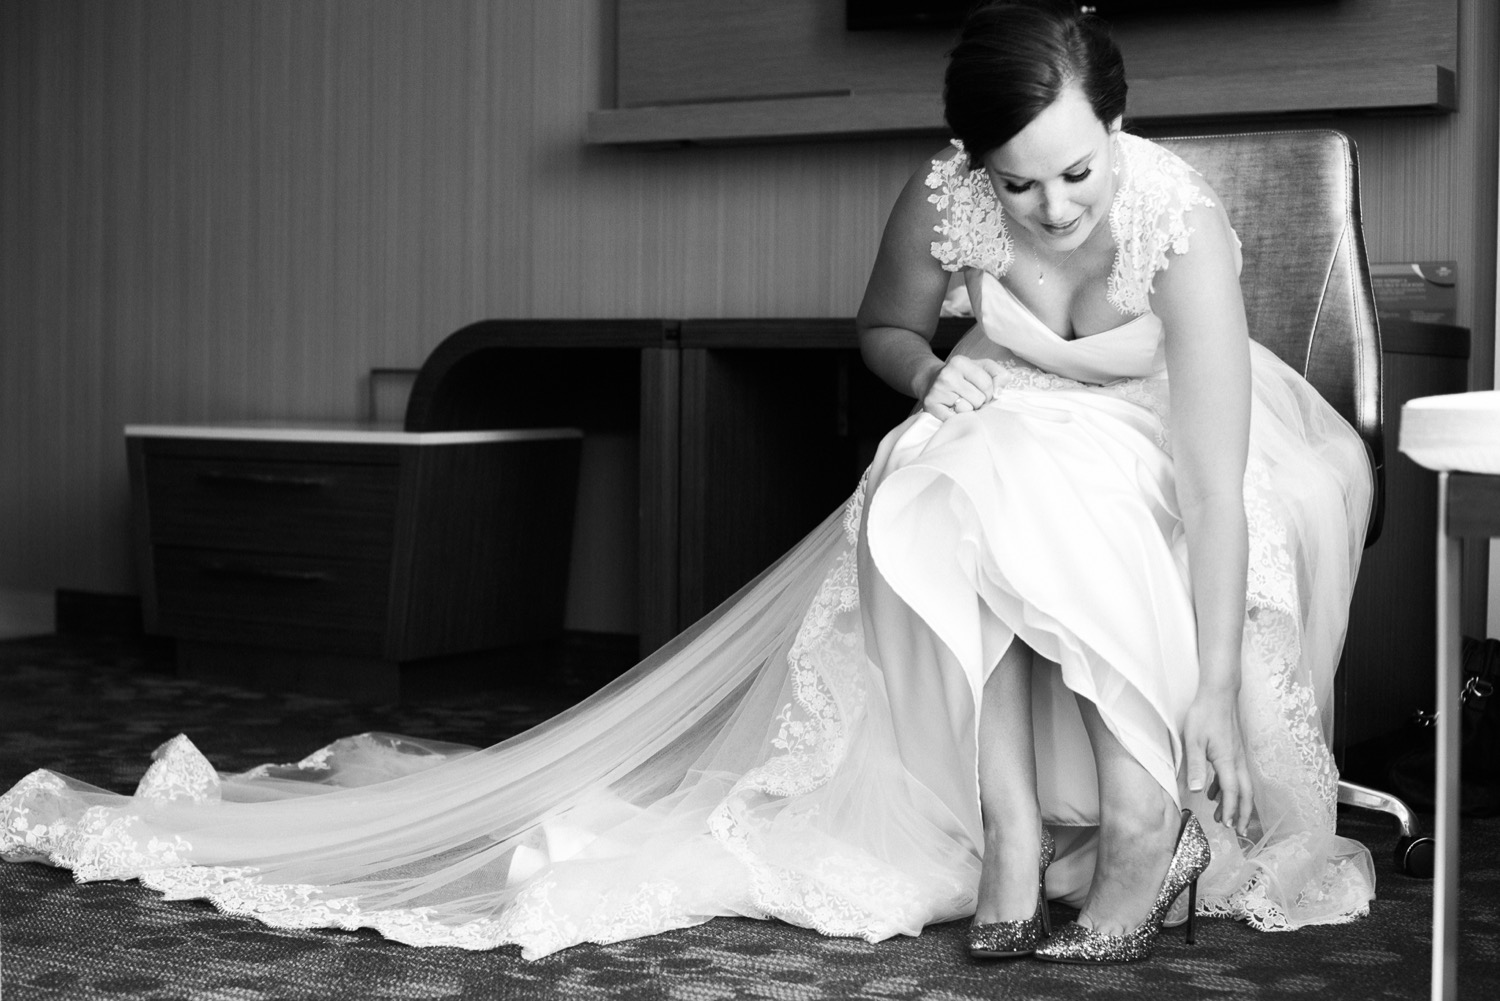 A bride gets ready for her wedding day